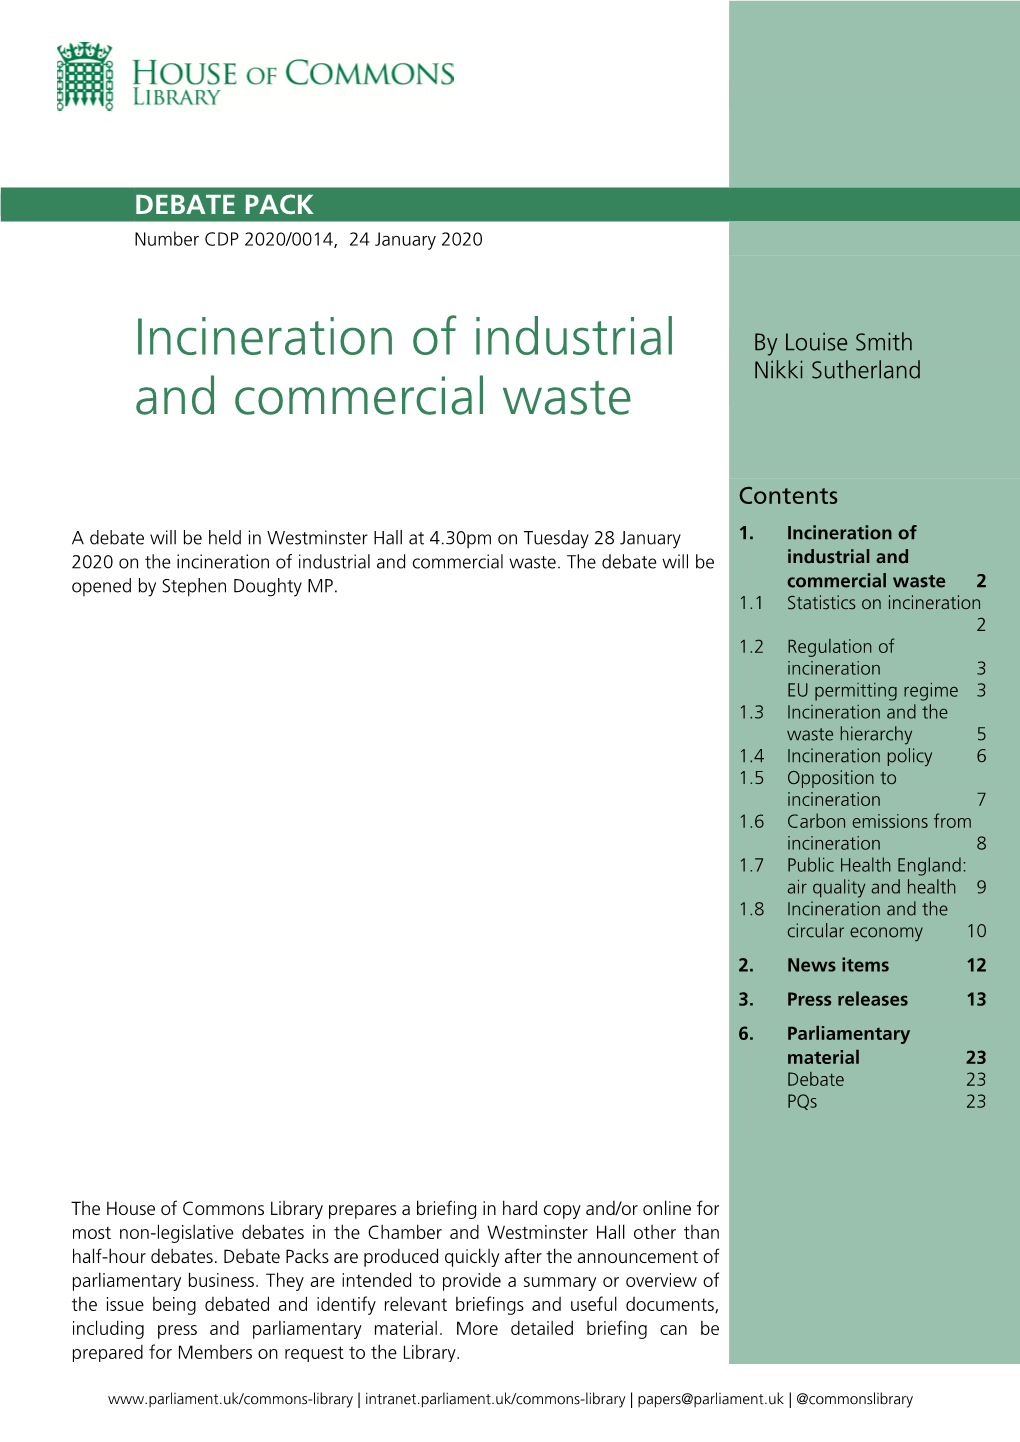 Incineration of Industrial and Commercial Waste